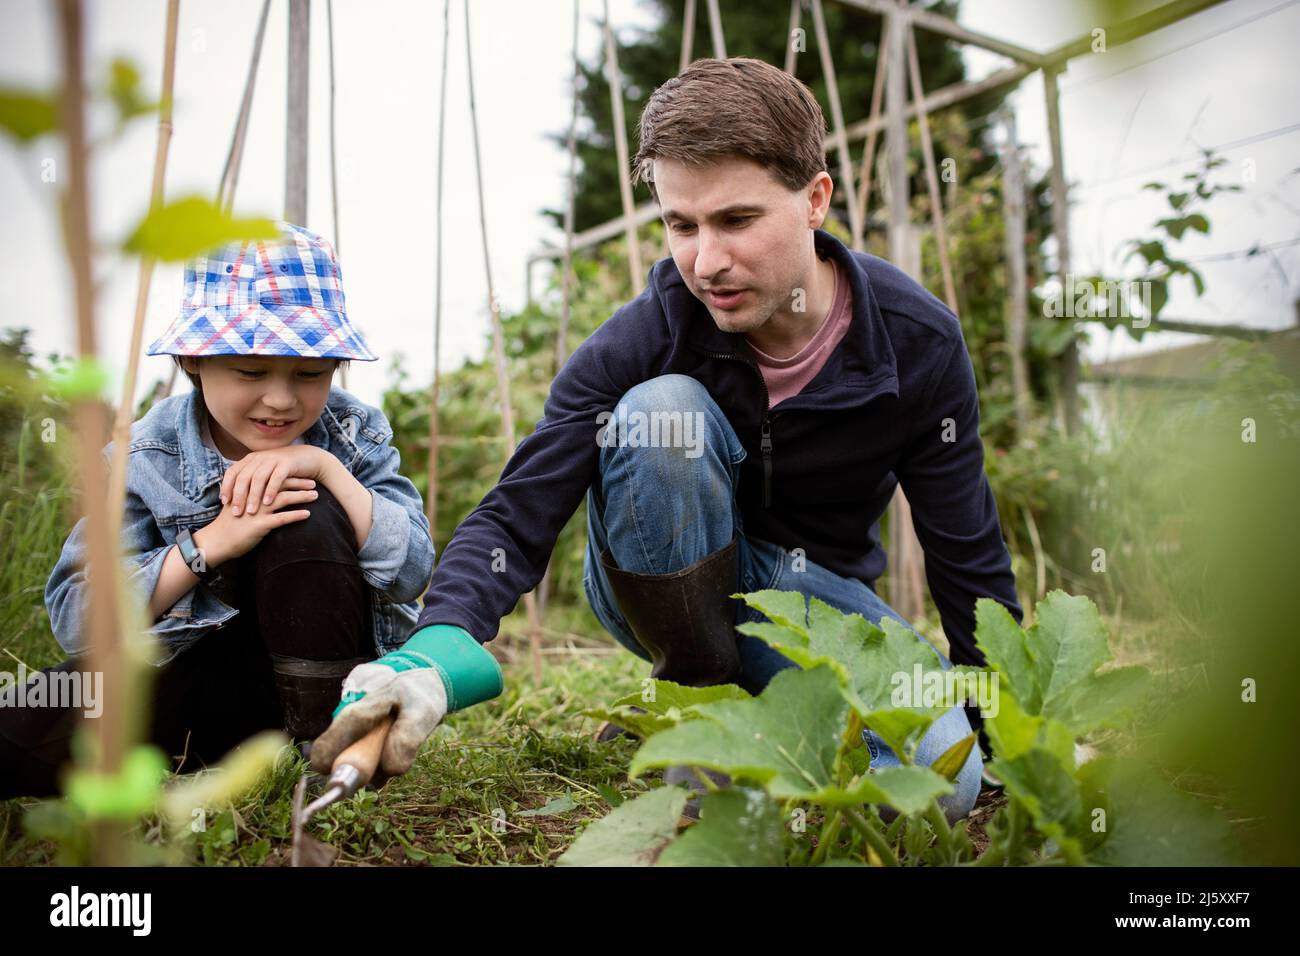 Father and son gardening in vegetable garden Stock Photo